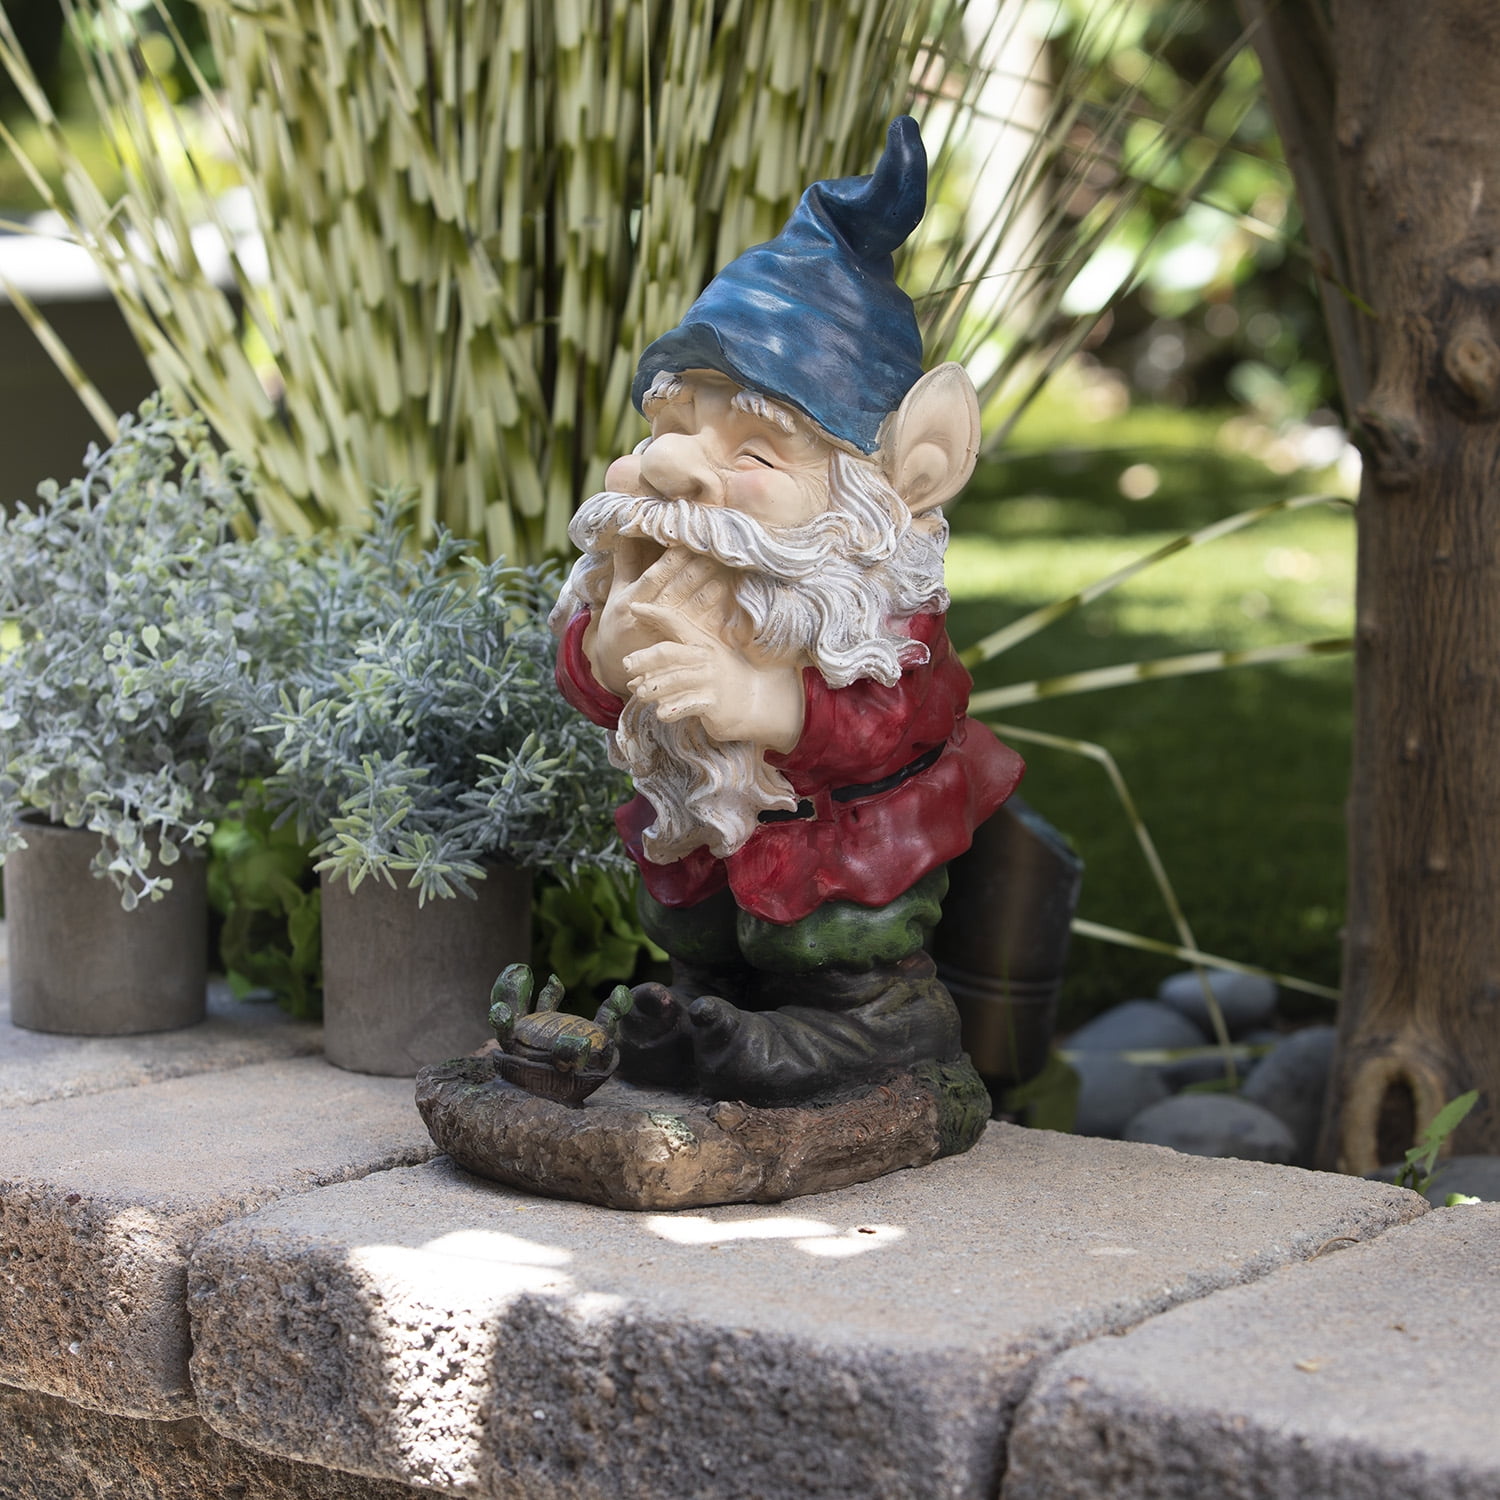 5" Hand Painted Ethnic Soil Brother Gnomes Plant/Garden Decor Collectible